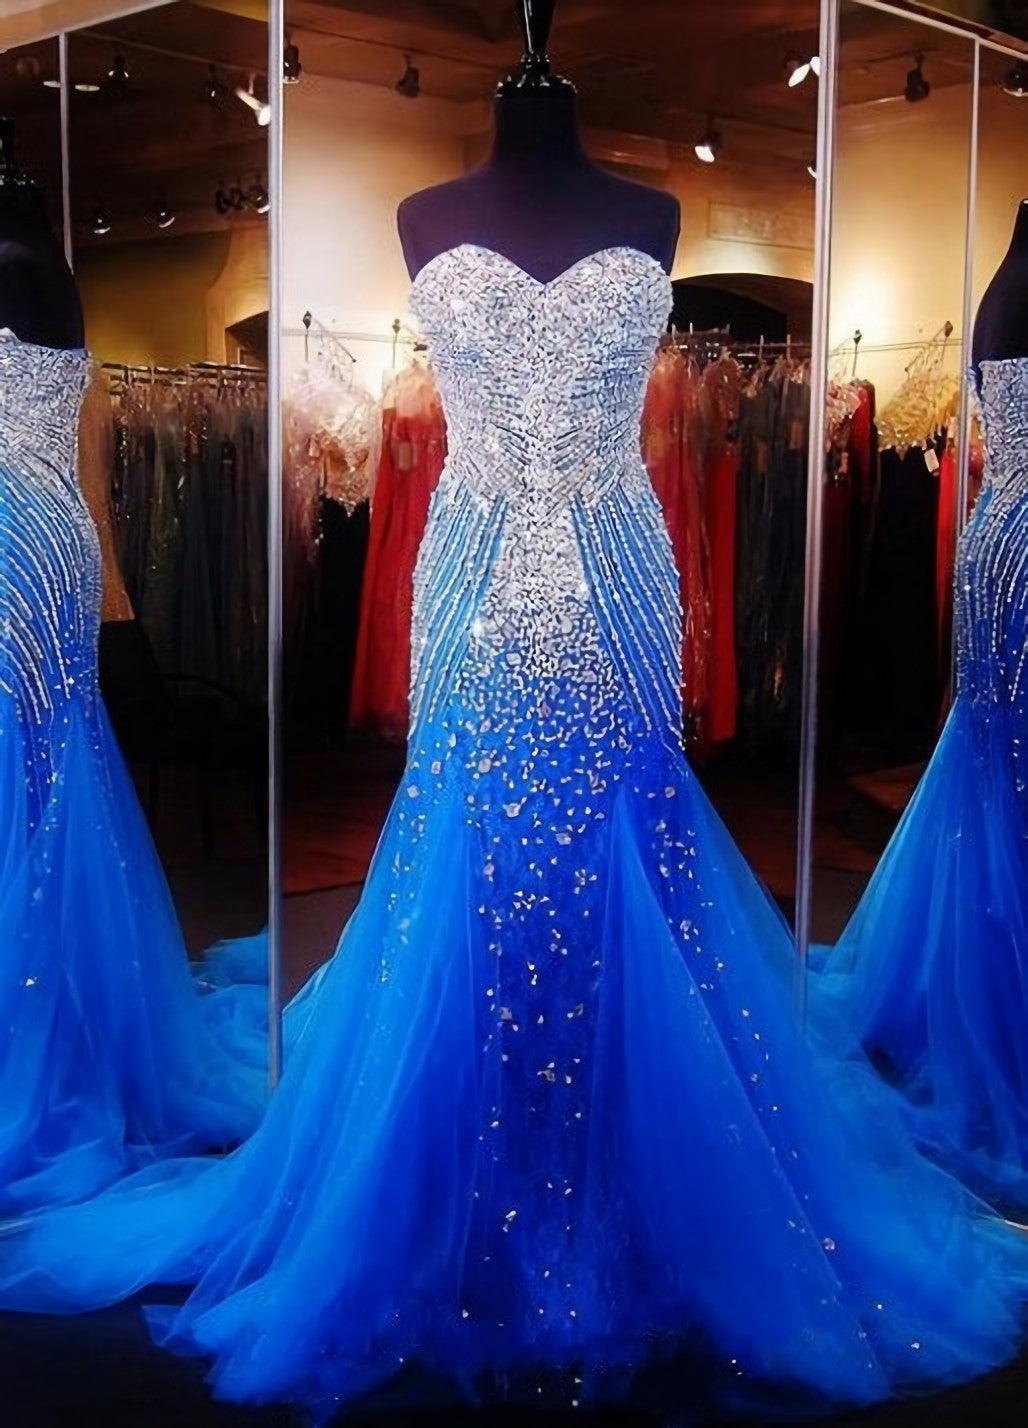 Royal Blue Prom Dresses, Royal Blue Prom Dress, Silver Beaded Formal Gown Mermaid Beadings Prom Dresses, Evening Gowns Tulle Formal Gown For Senior Teens